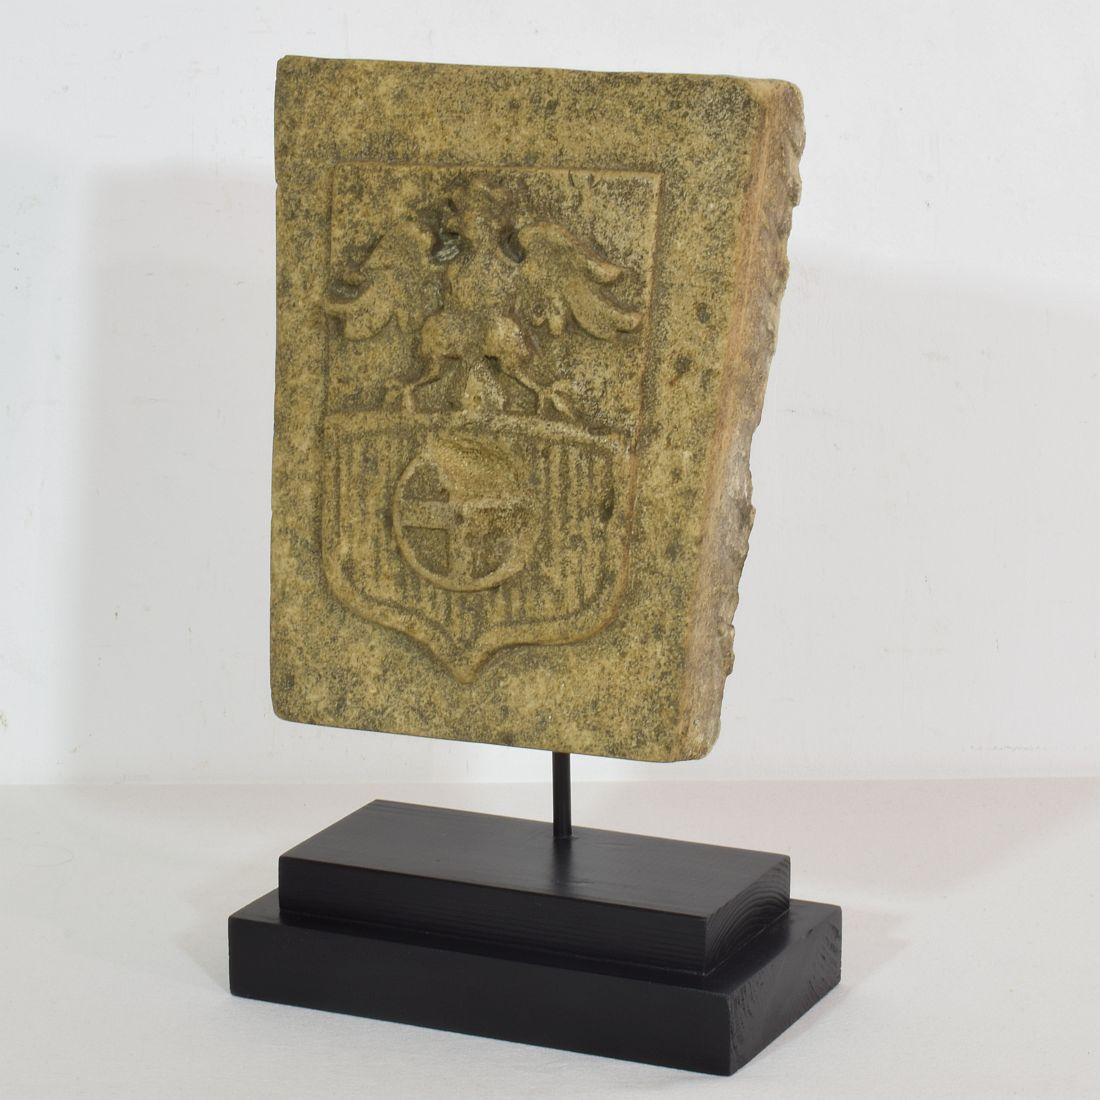 Very beautiful hand carved limestone coat of arms with a crowned eagle. Great weathered patina
France, circa 1750. Weathered and small losses.
Measurement here below is inclusive the wooden base.